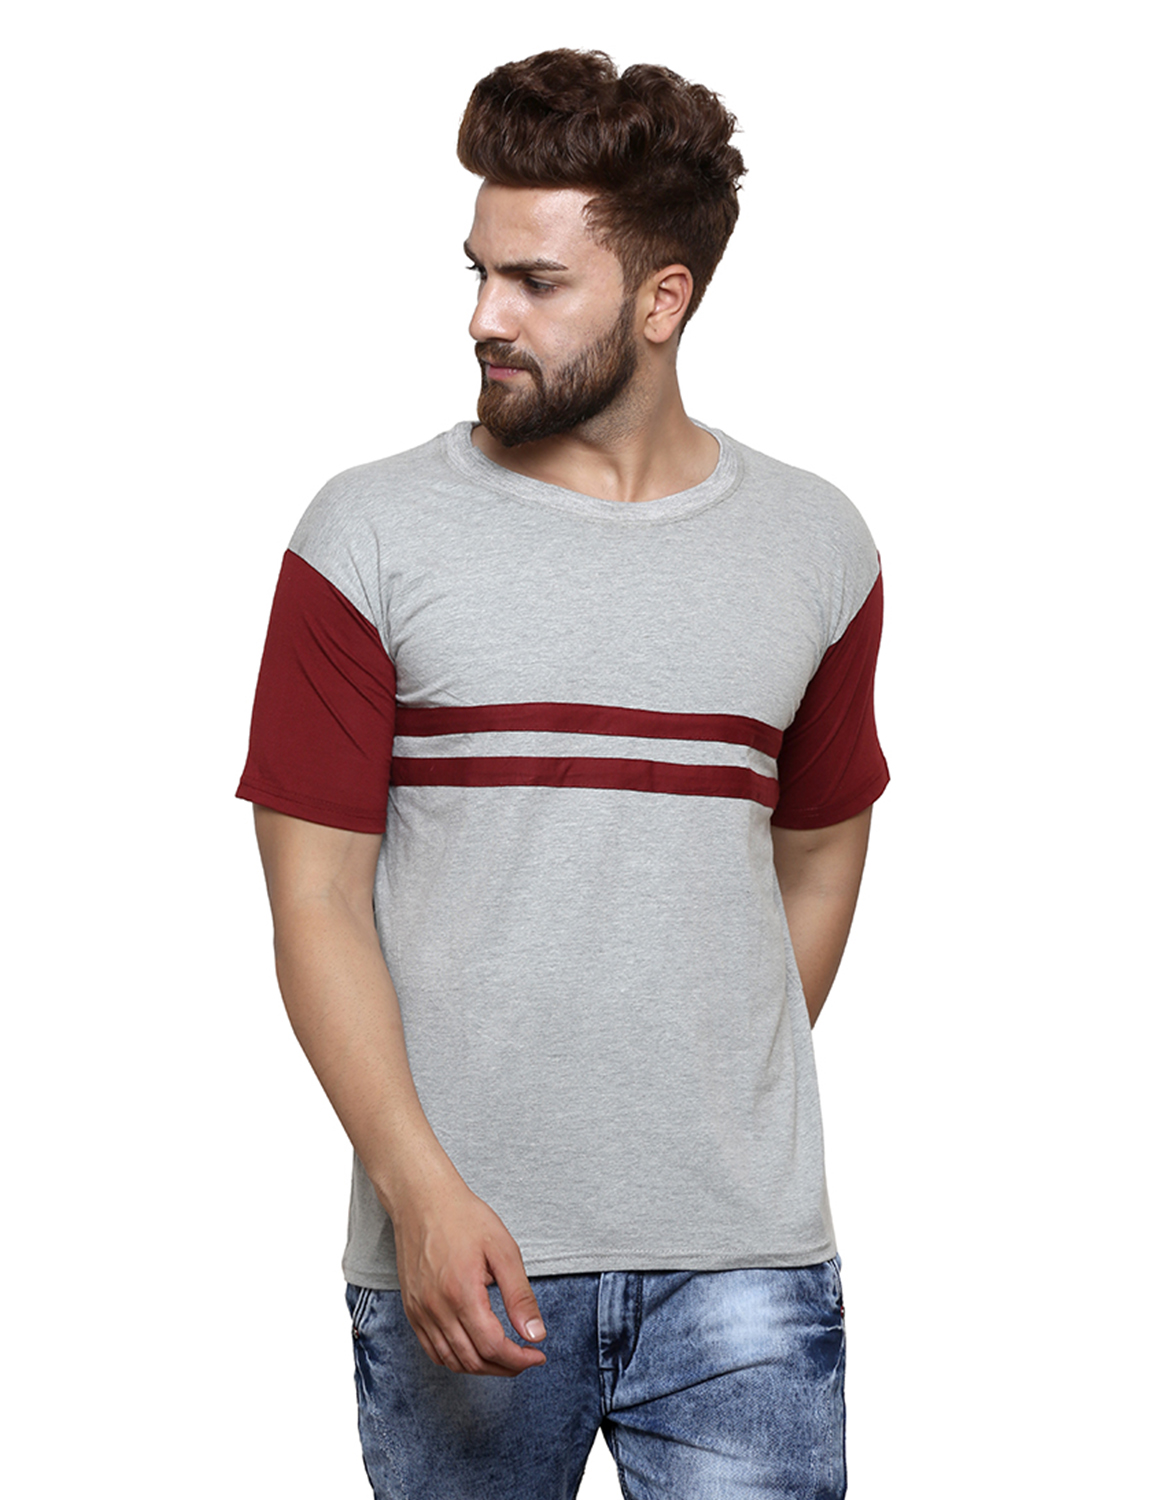 Buy Round Neck Multicolor T Shirt For Men Online ₹279 From Shopclues 7773